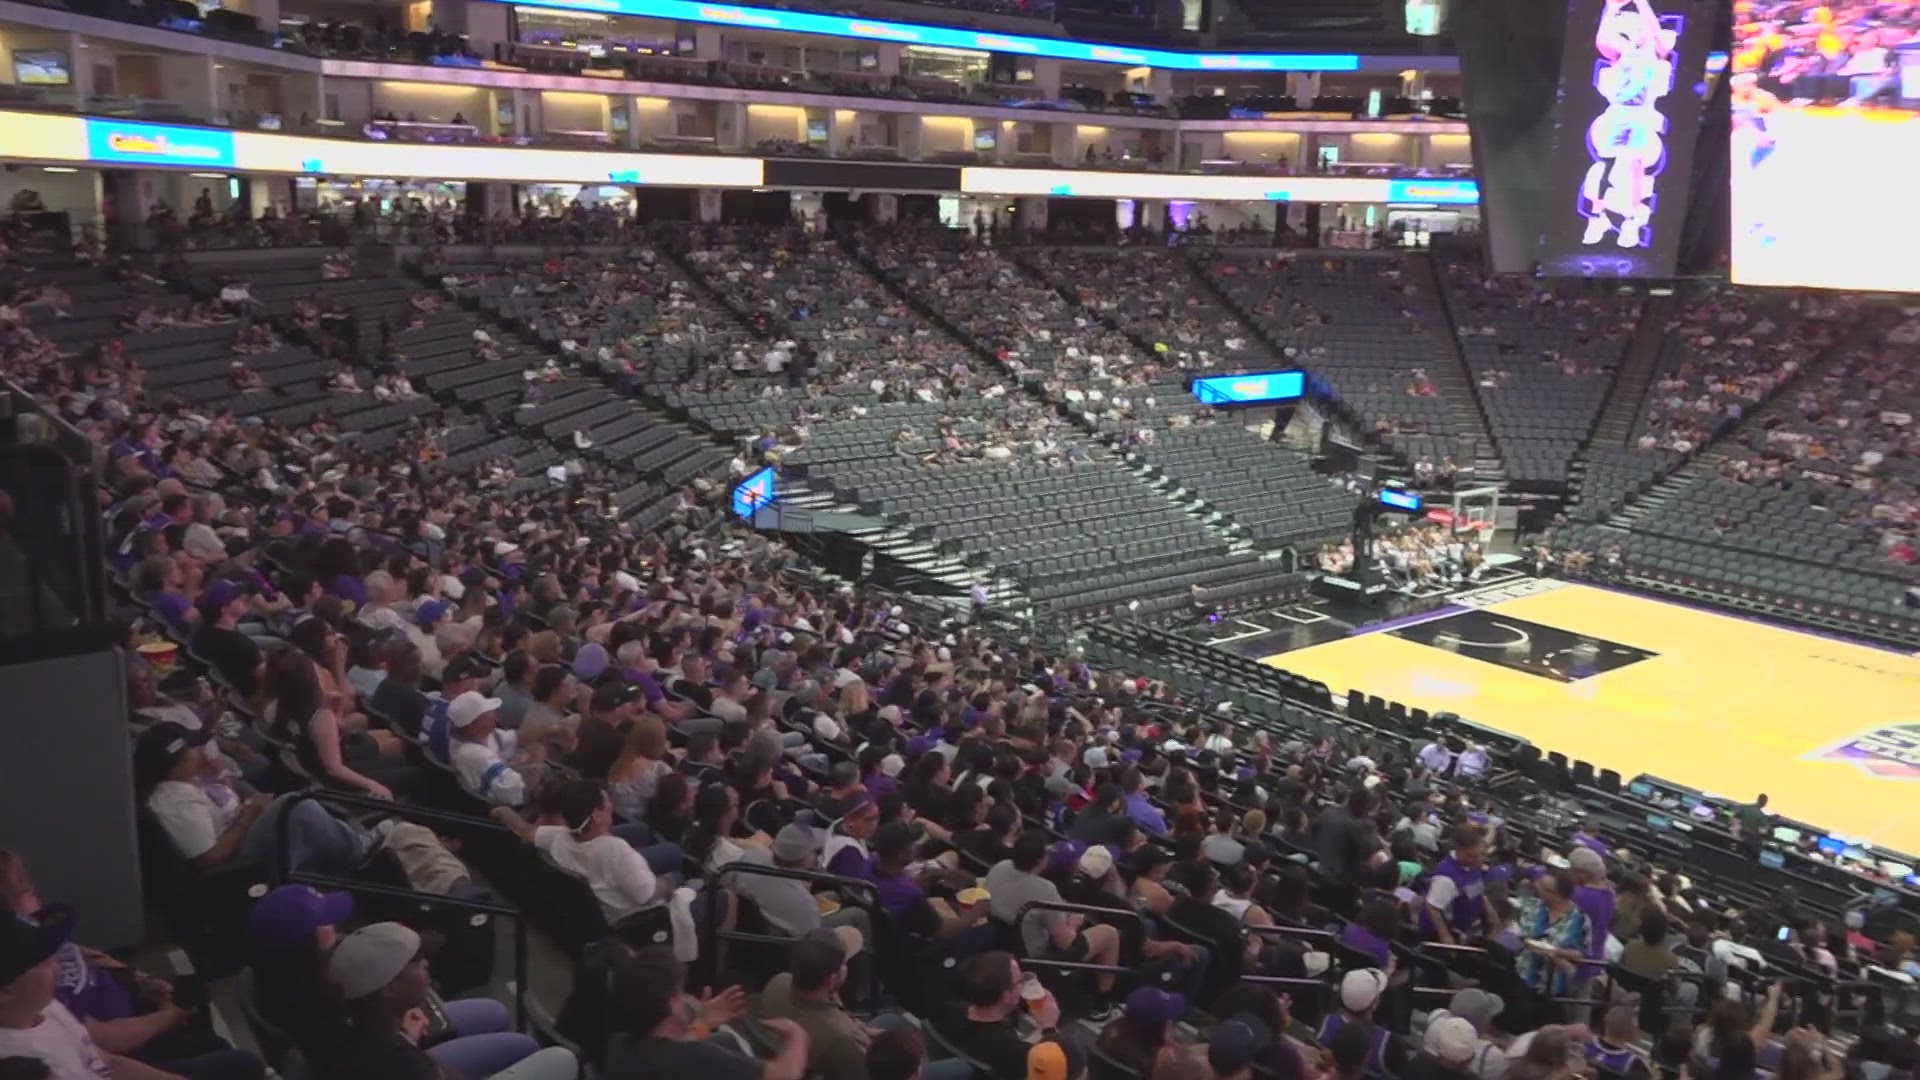 While the Sacramento Kings played on the Golden State Warriors home court, fans flooded into the Golden 1 Center for a watch party to see Game 6.